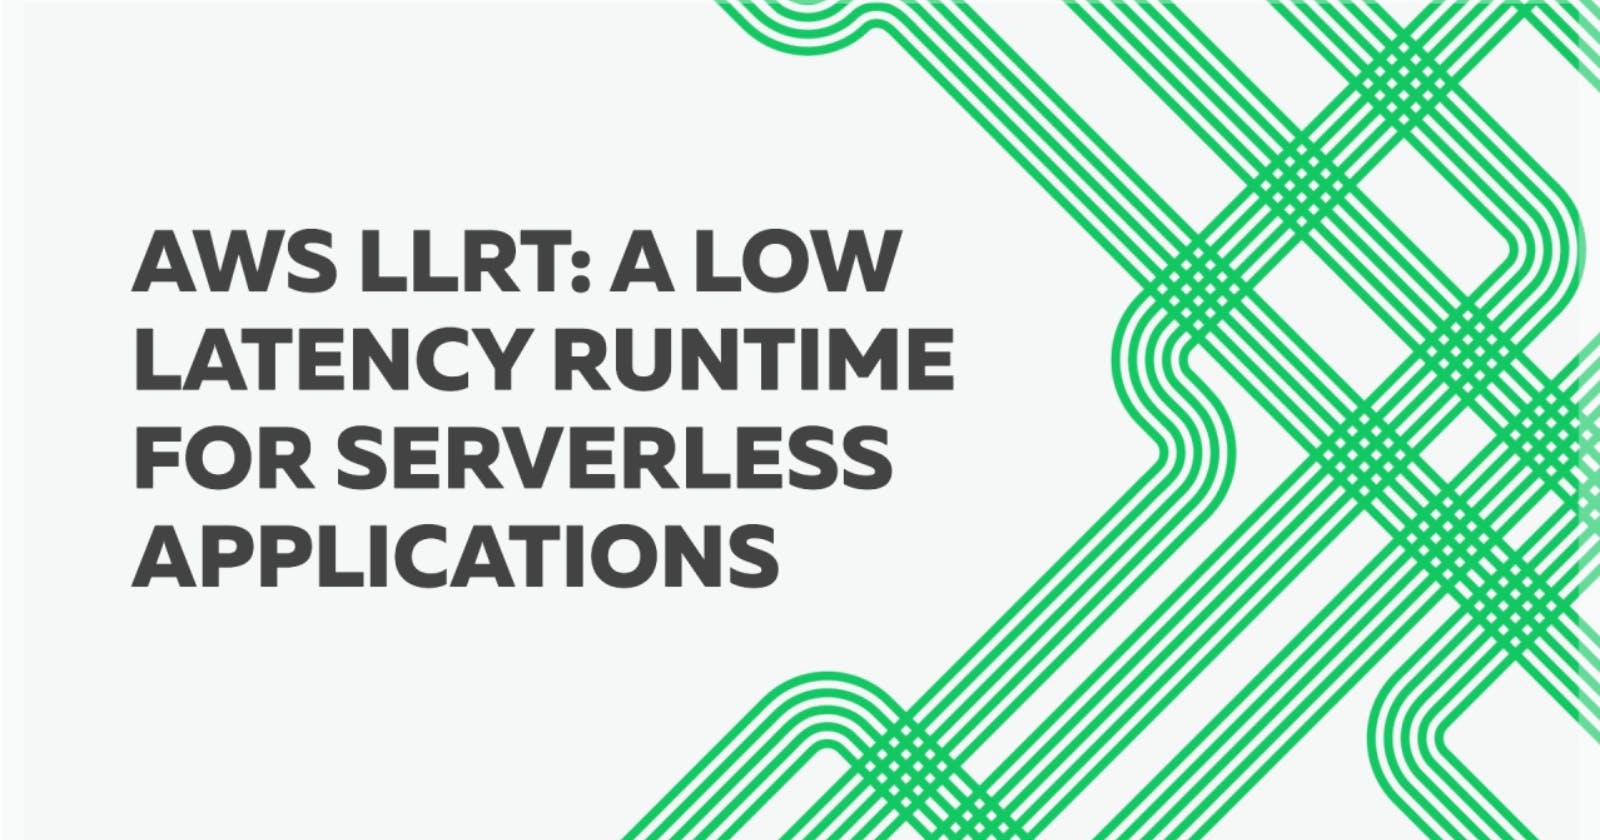 AWS LLRT: A Low Latency Runtime for Serverless Applications